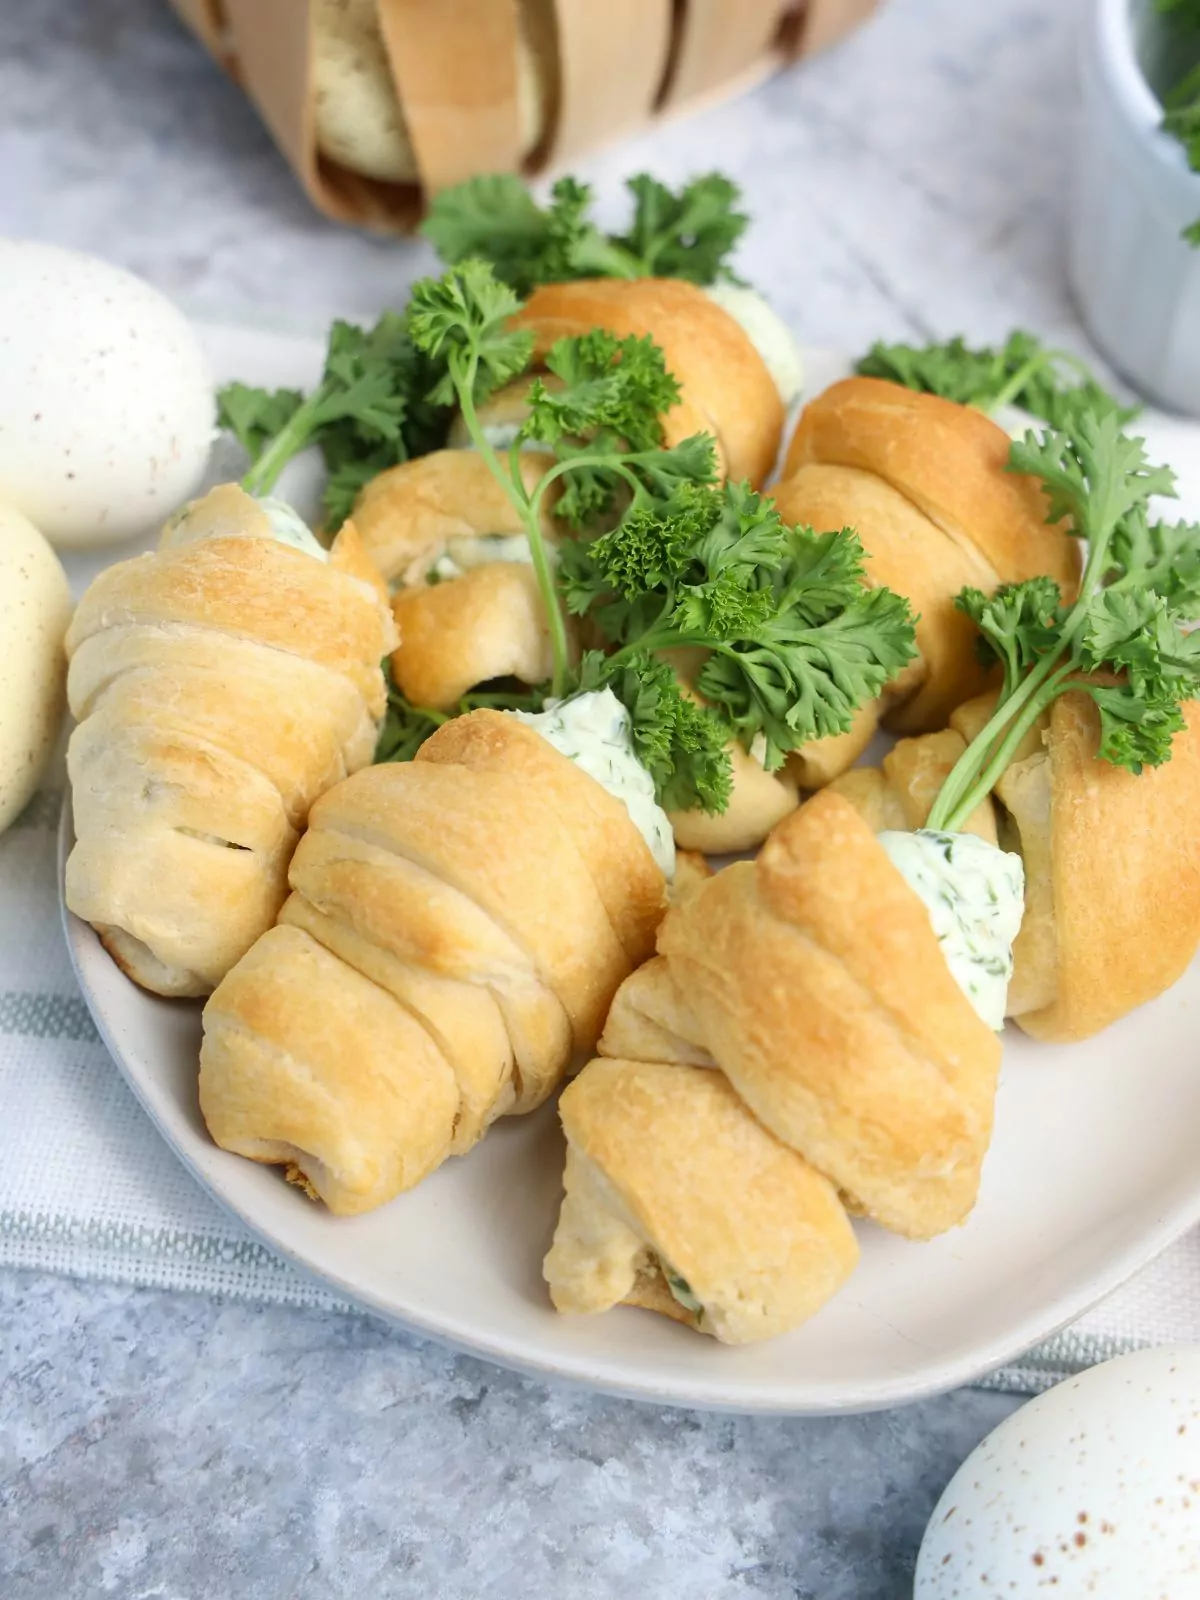 Crescent roll carrots with spinach dip.